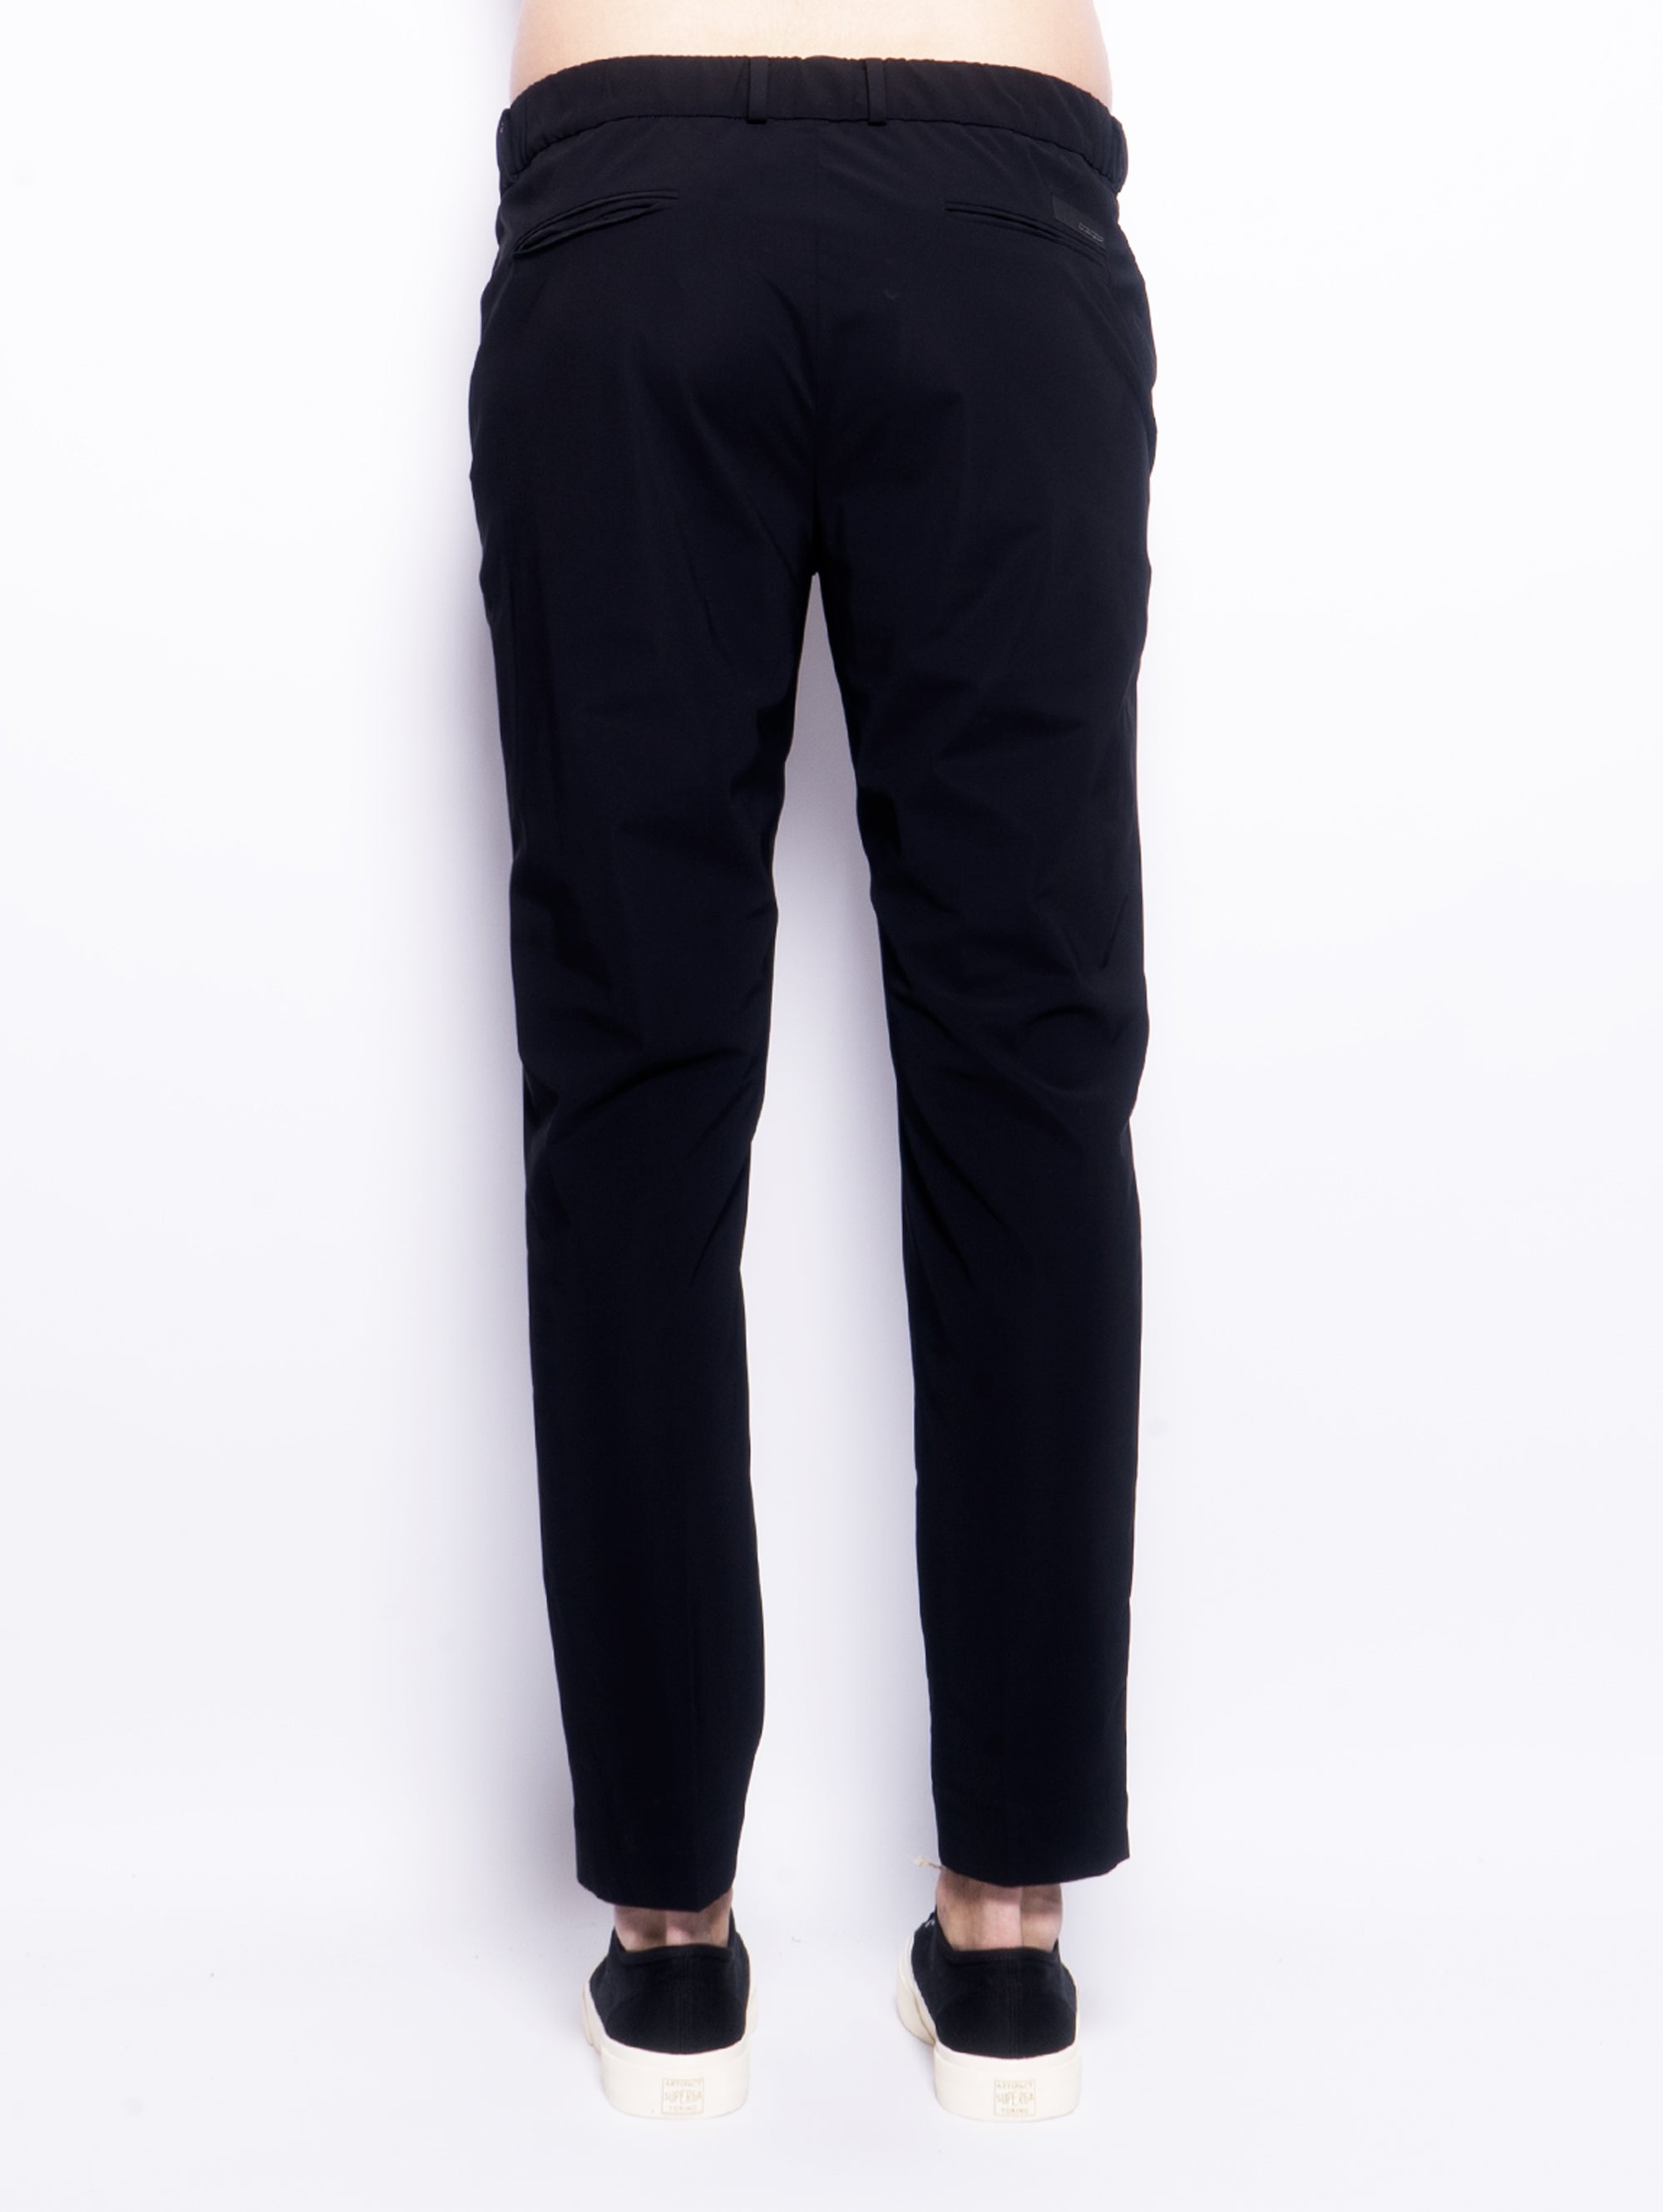 Trousers in Black Technical Fabric